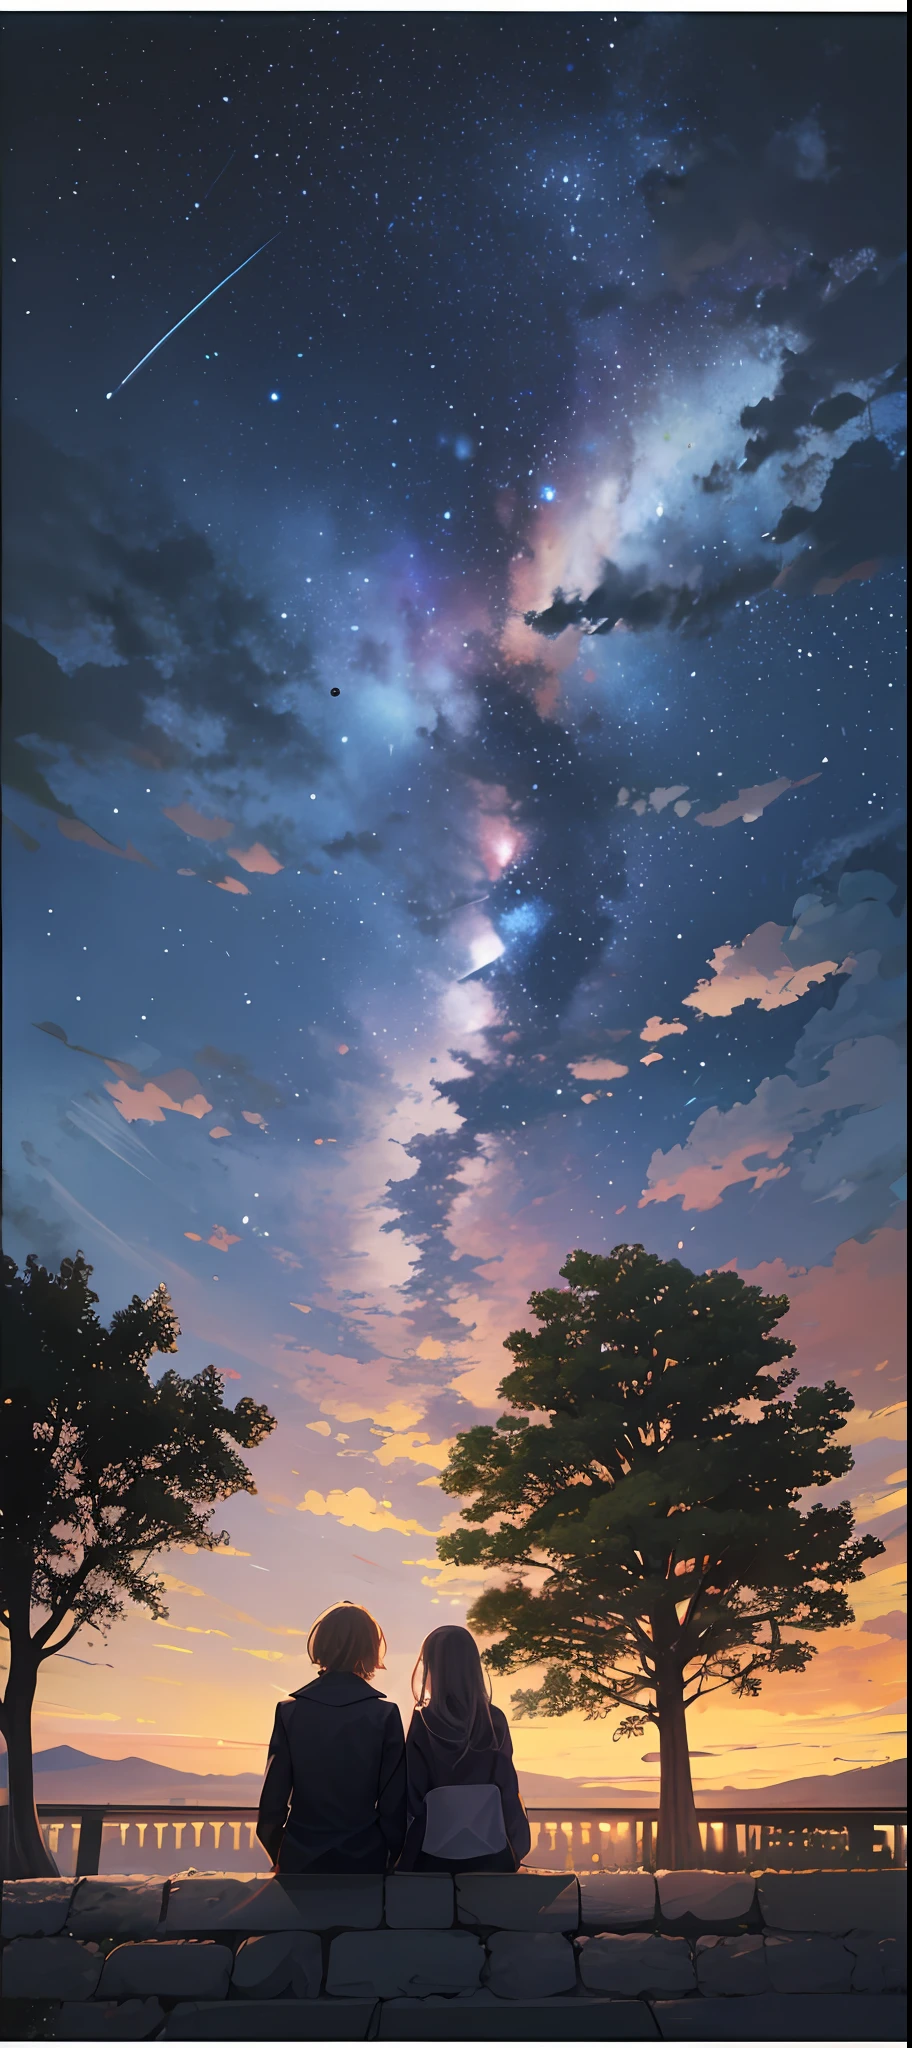 octane，skies，As estrelas（skies），scenecy，stary sky，Night，1 pair of men and women，night  sky，solo，cool，architectural，the clouds，the Milky Way，Sit，The tree，Long hair，miji，siluettes，townscape，late evening，The vastness is vast